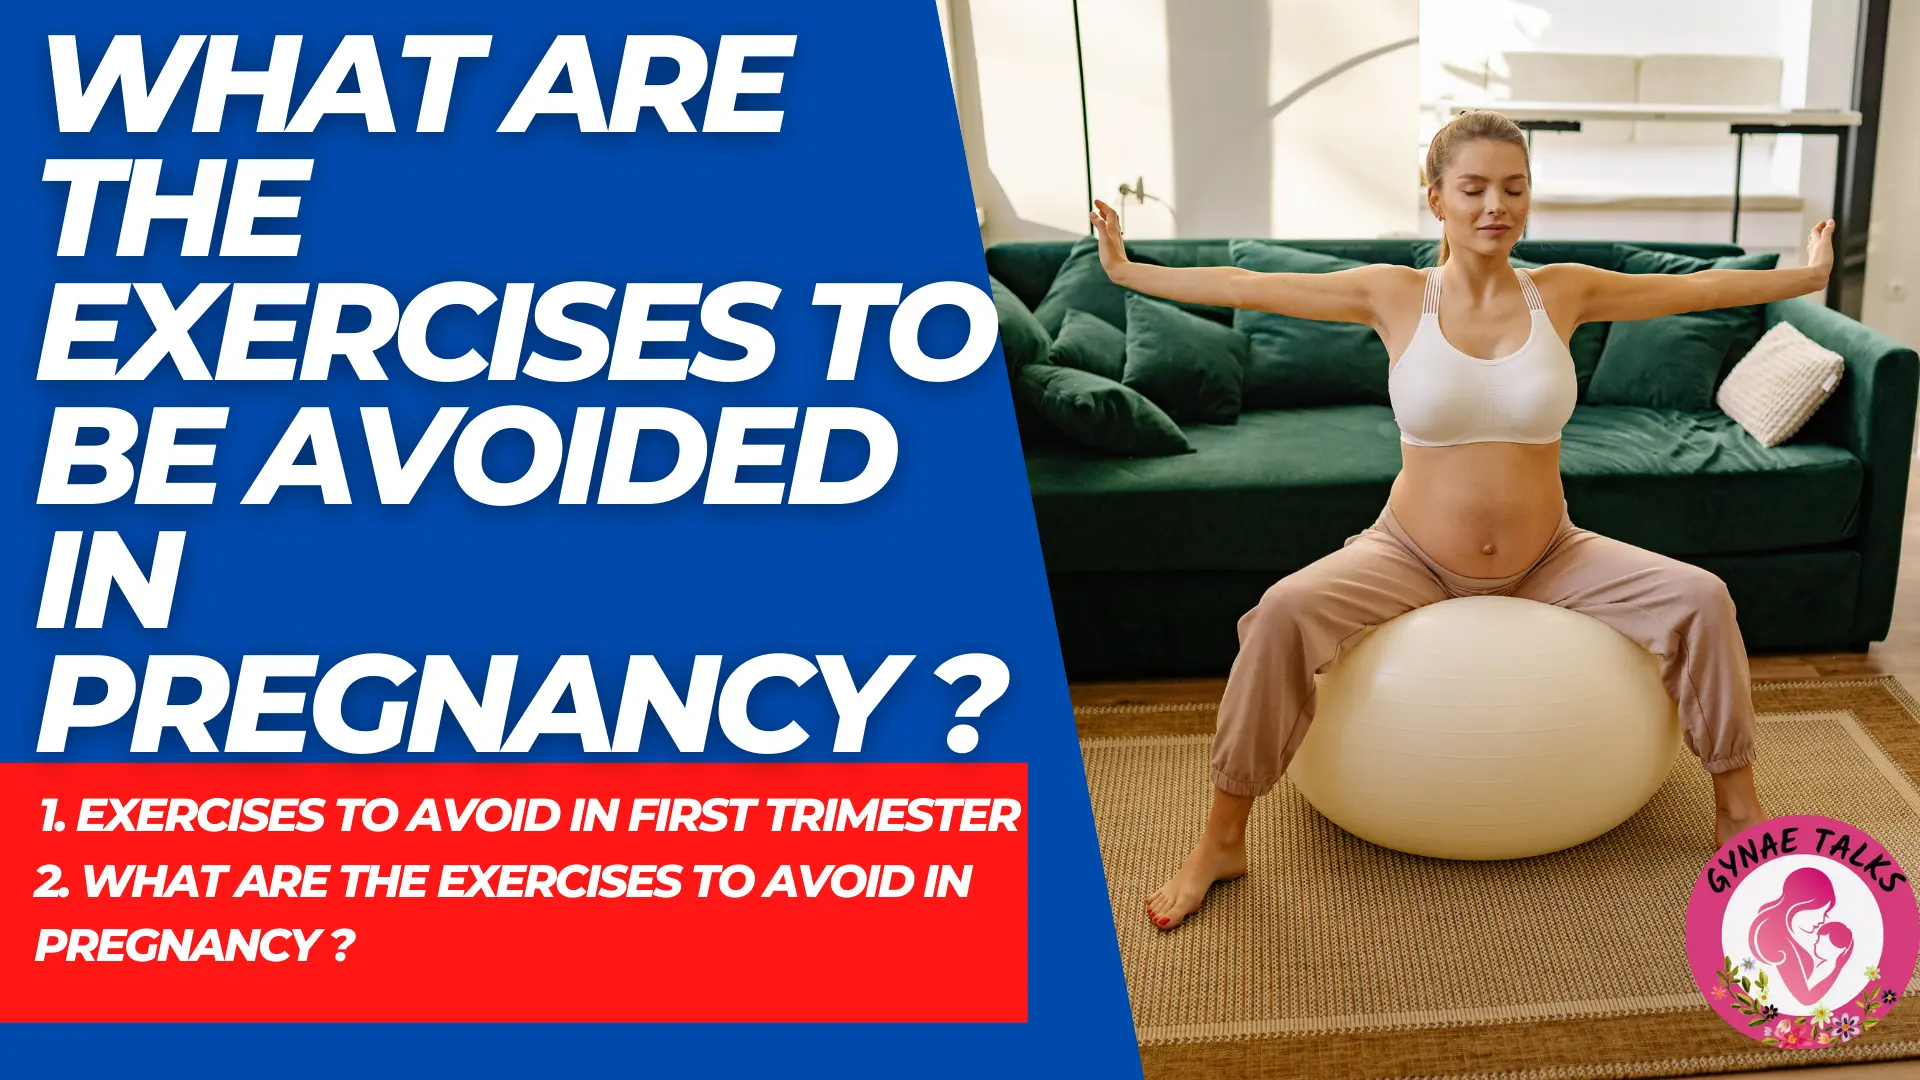 Exercise to avoid during Pregnancy